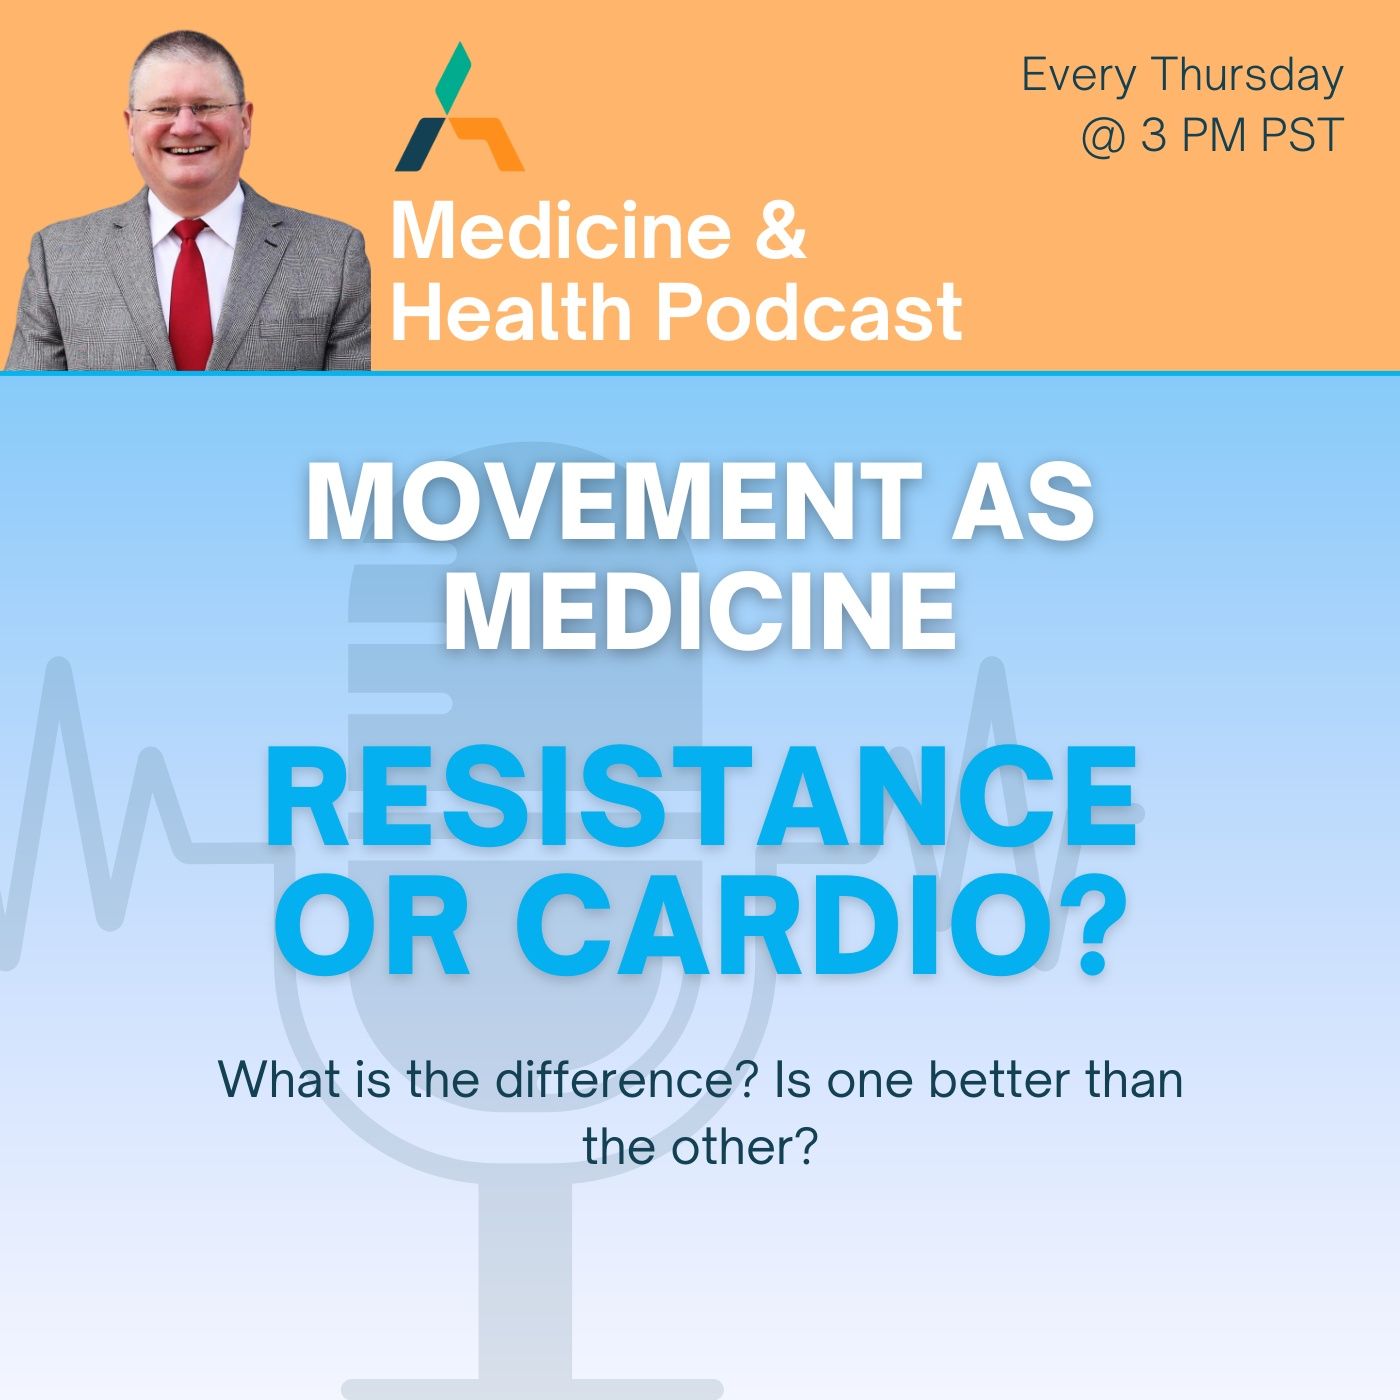 RESISTANCE OR CARDIO: What is the difference? Is one better than the other?